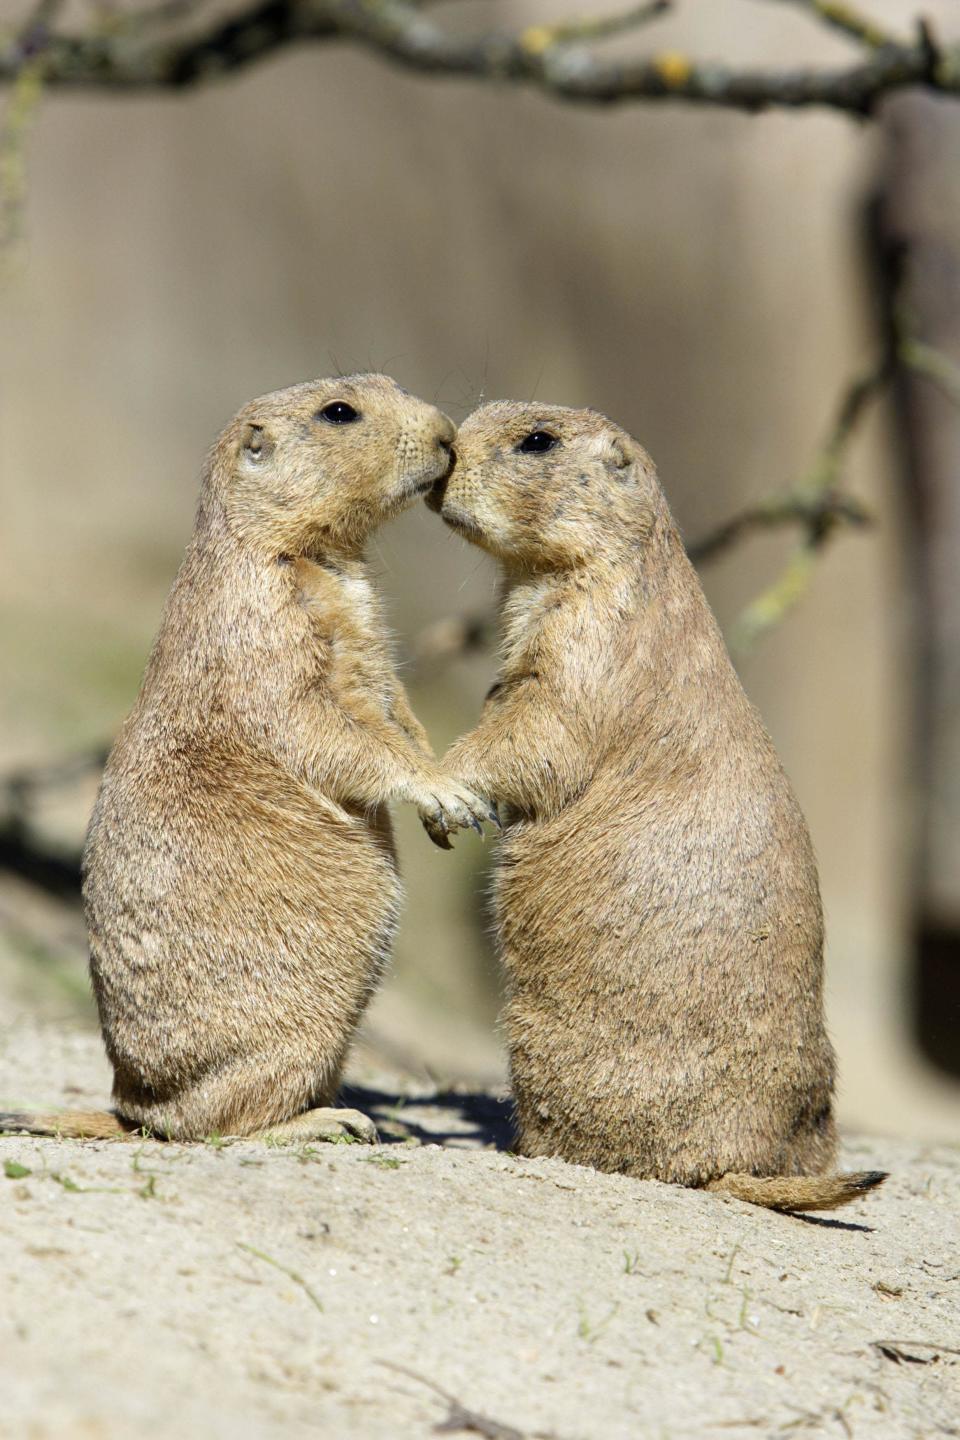 PIC BY DUNCAN USHER / ARDEA / CATERS NEWS - (Pictured TWO AFFECTIONATE PRARIE DOGS) - From a loving look to an affectionate nuzzle, these are the charming images of cute creatures cozying up for Valentines Day. And as the heart-warming pictures show the animal kingdom can be just as romantic as us humans when it comes to celebrating the big day.